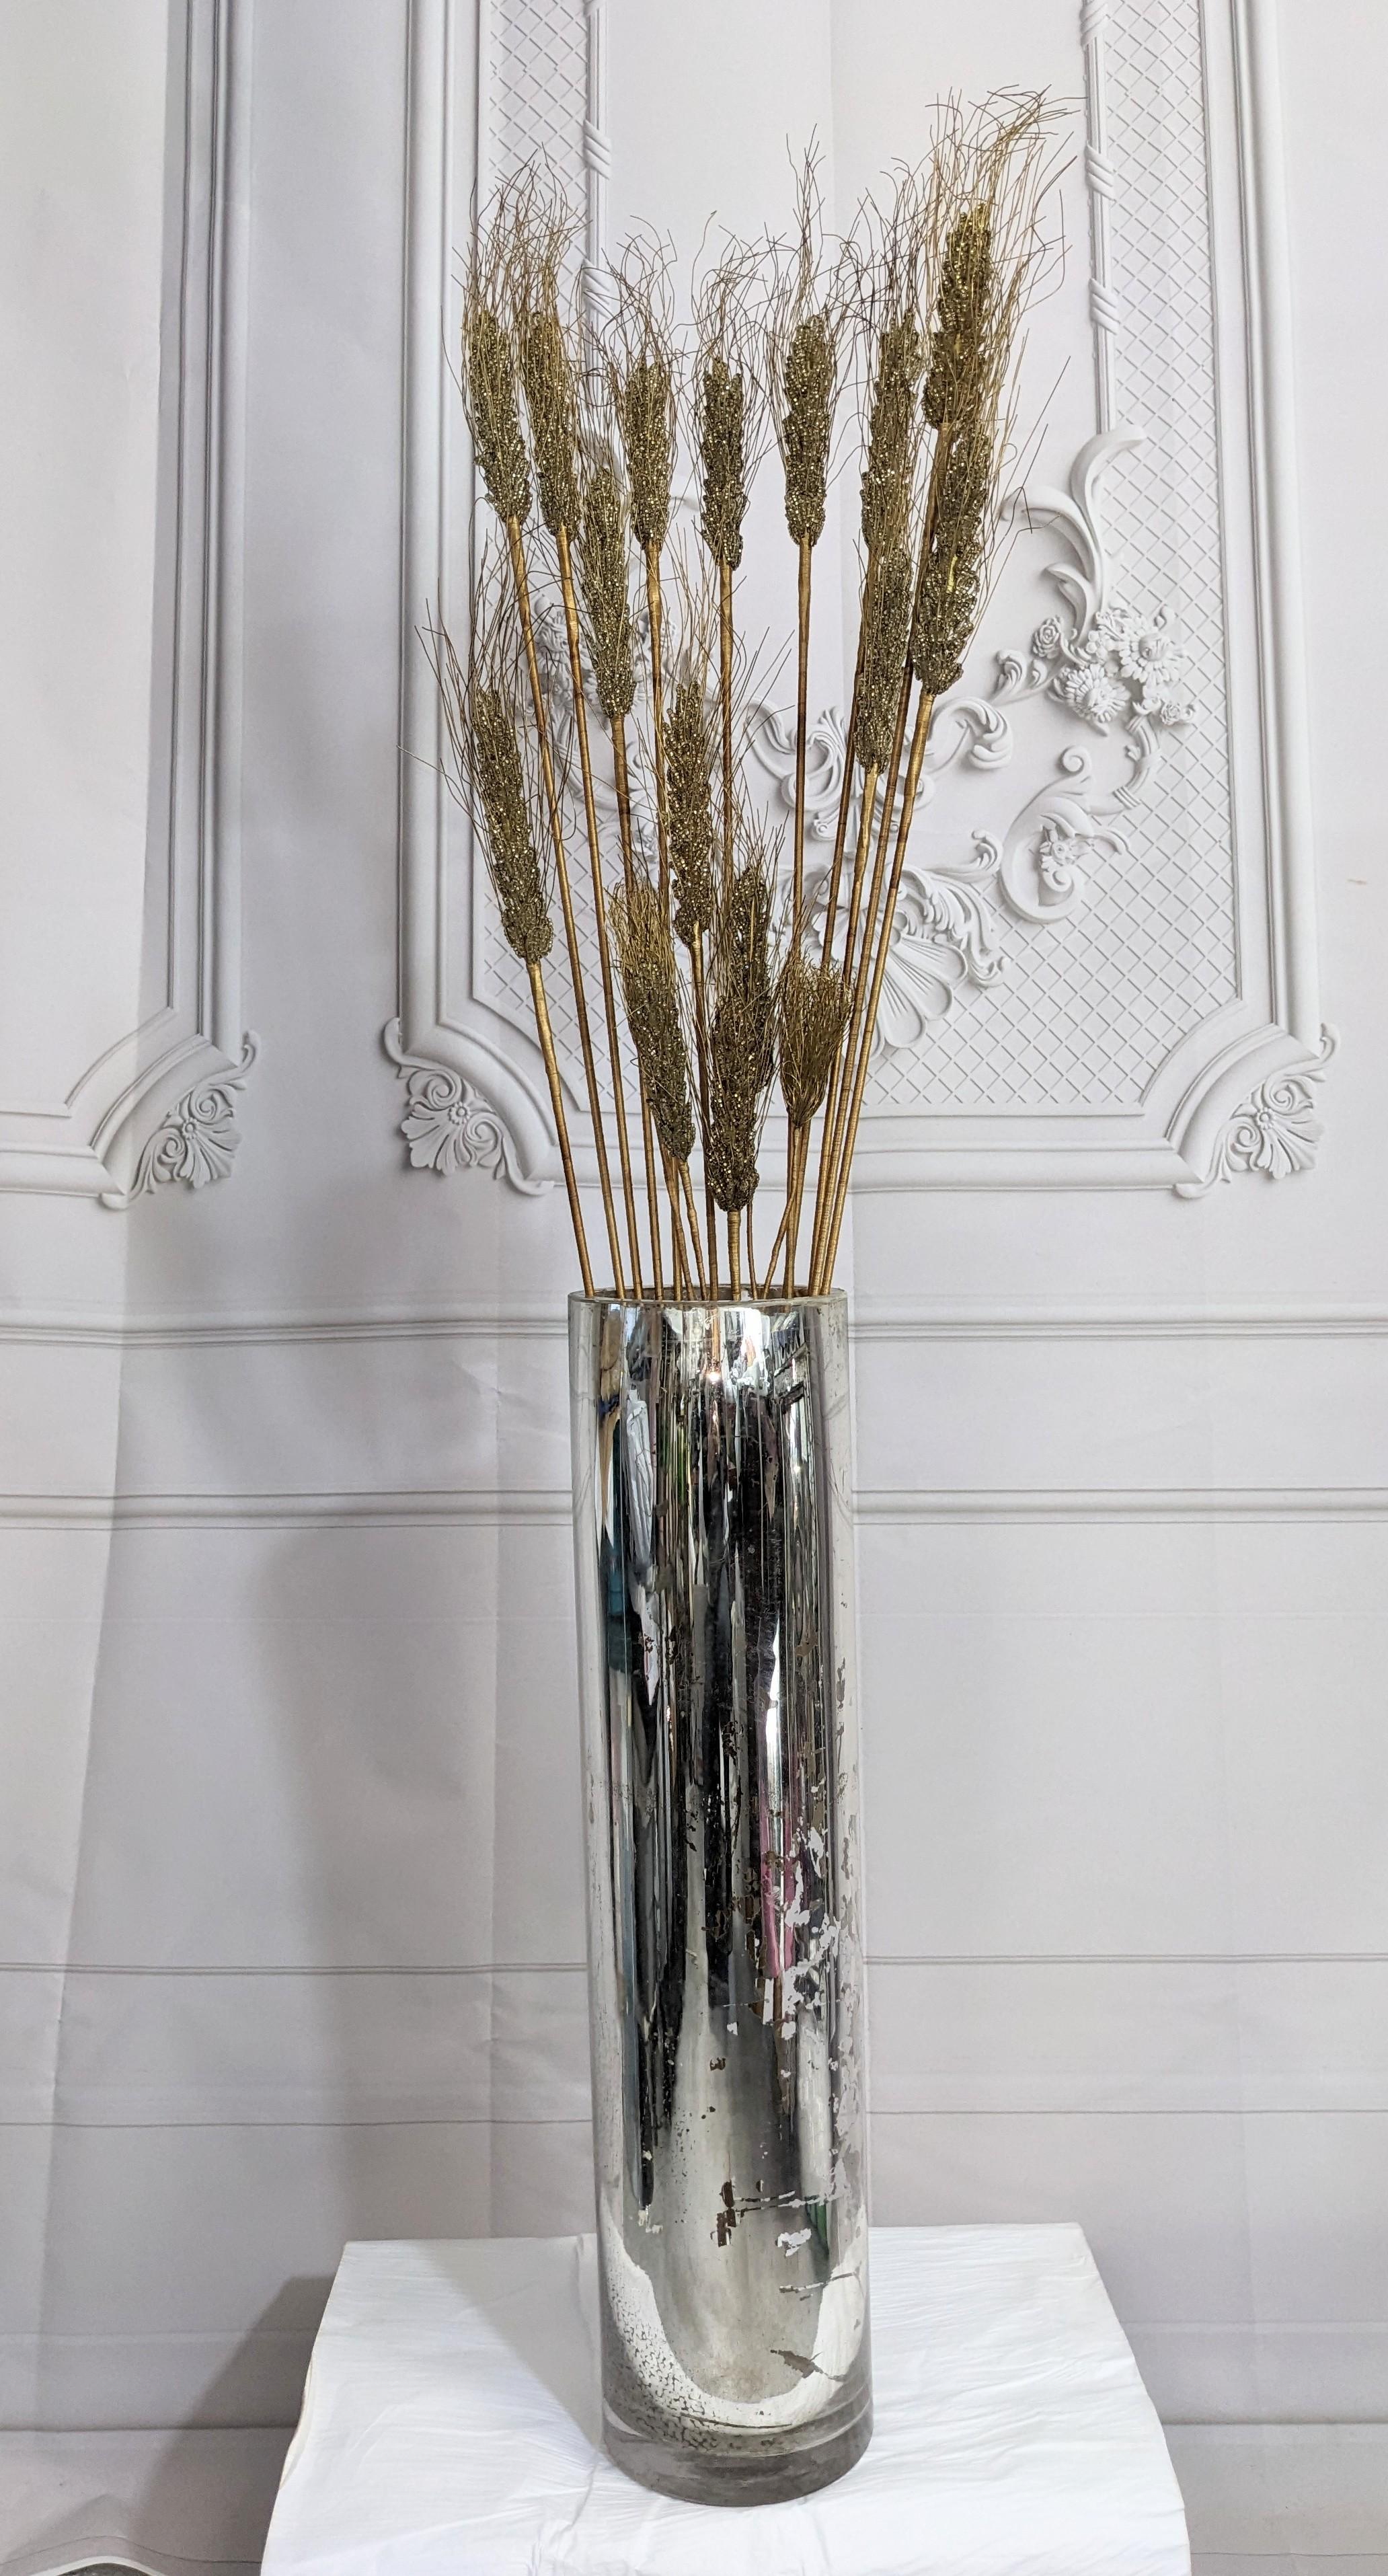 Set of Hand Beaded French Wheat Sheaves from the mid 20th century. Hand beaded with tiny gold seed beads and brass filament to represent corn silk. A variety of different heights for arranging in a vase. 
Hand beaded flowers is a French tradition